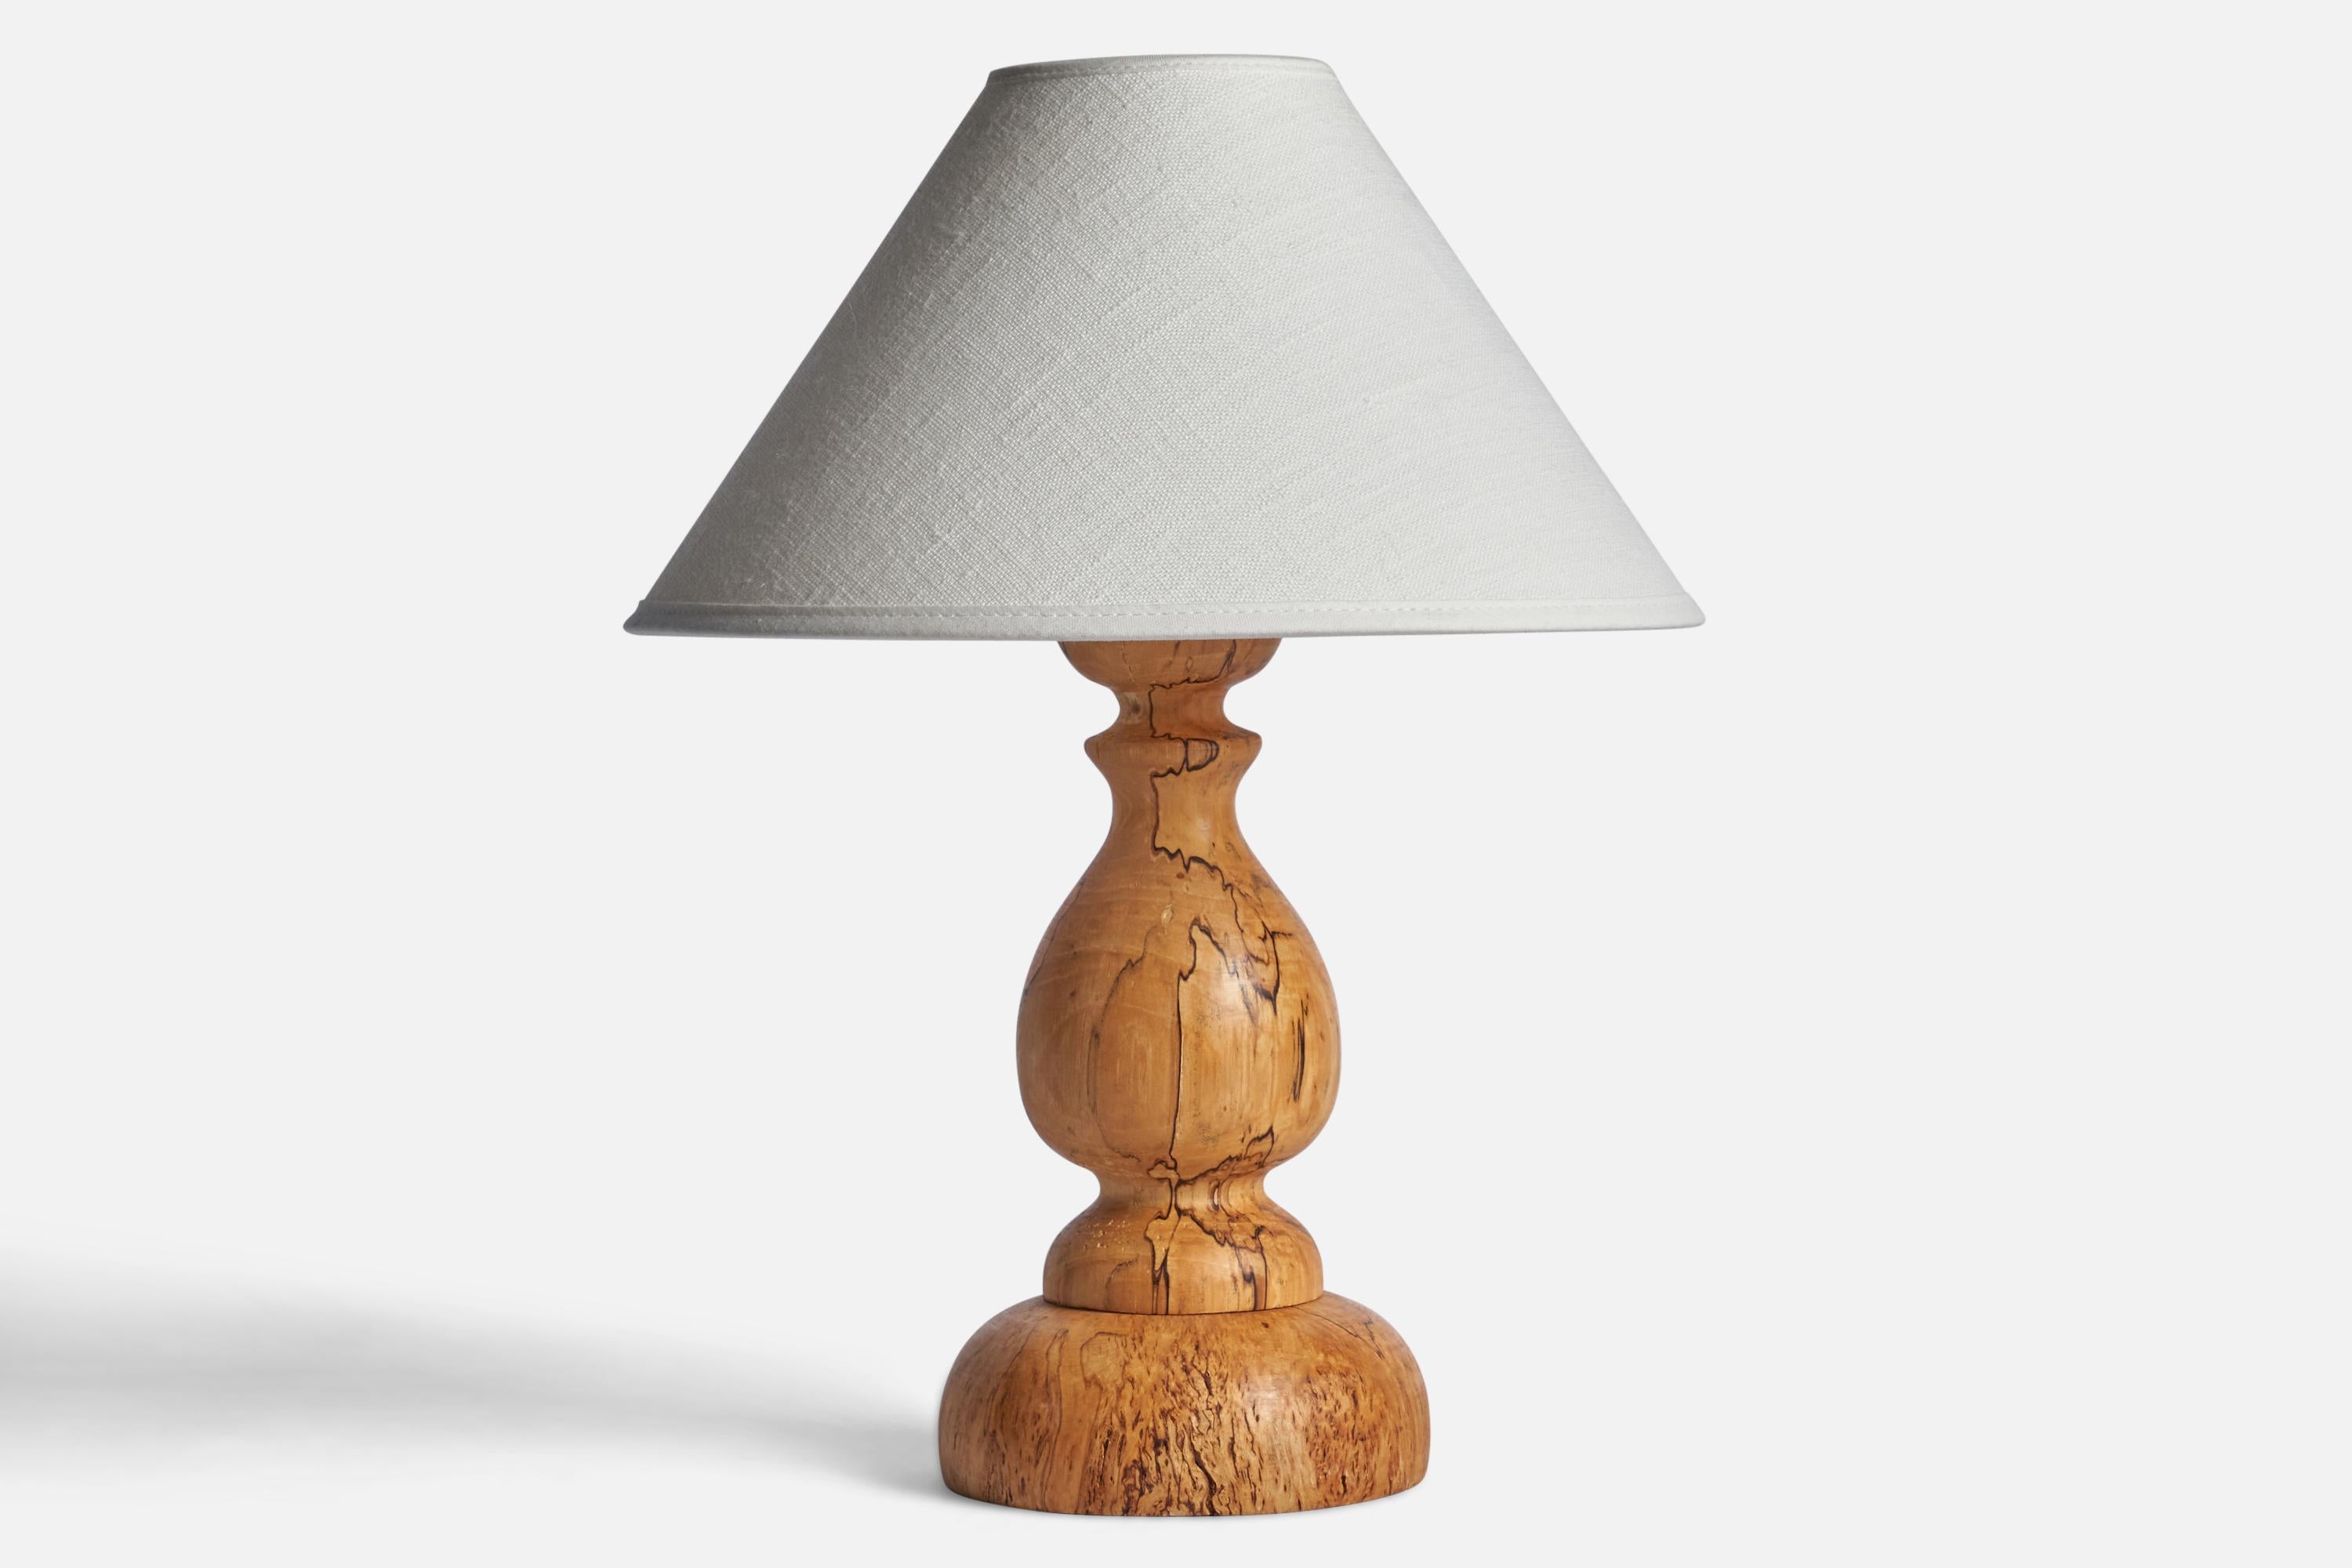 A masur birch table lamp designed and produced in Sweden, c. 1960s.

Dimensions of Lamp (inches): 10.15” H x 4.5” Diameter
Dimensions of Shade (inches): 2.5” Top Diameter x 10” Bottom Diameter x 5.5